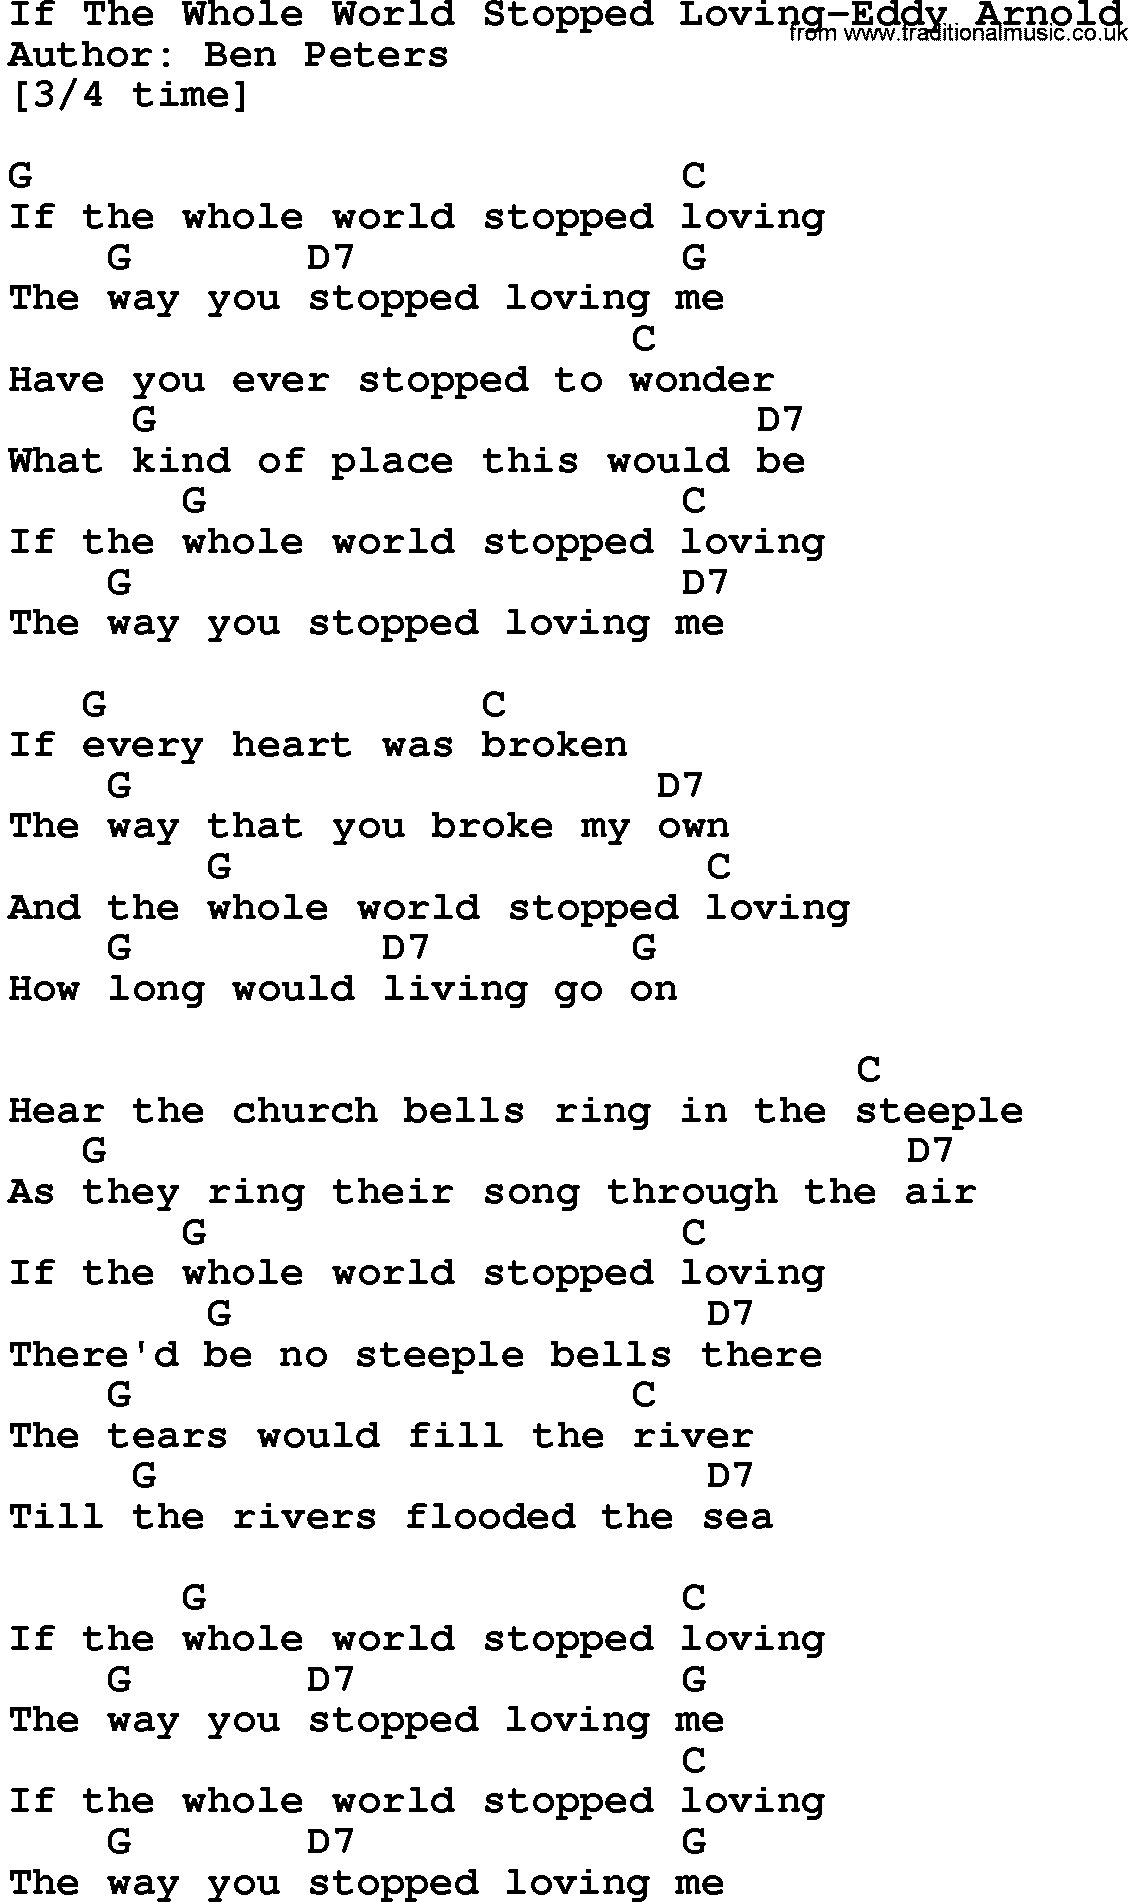 Country music song: If The Whole World Stopped Loving-Eddy Arnold lyrics and chords